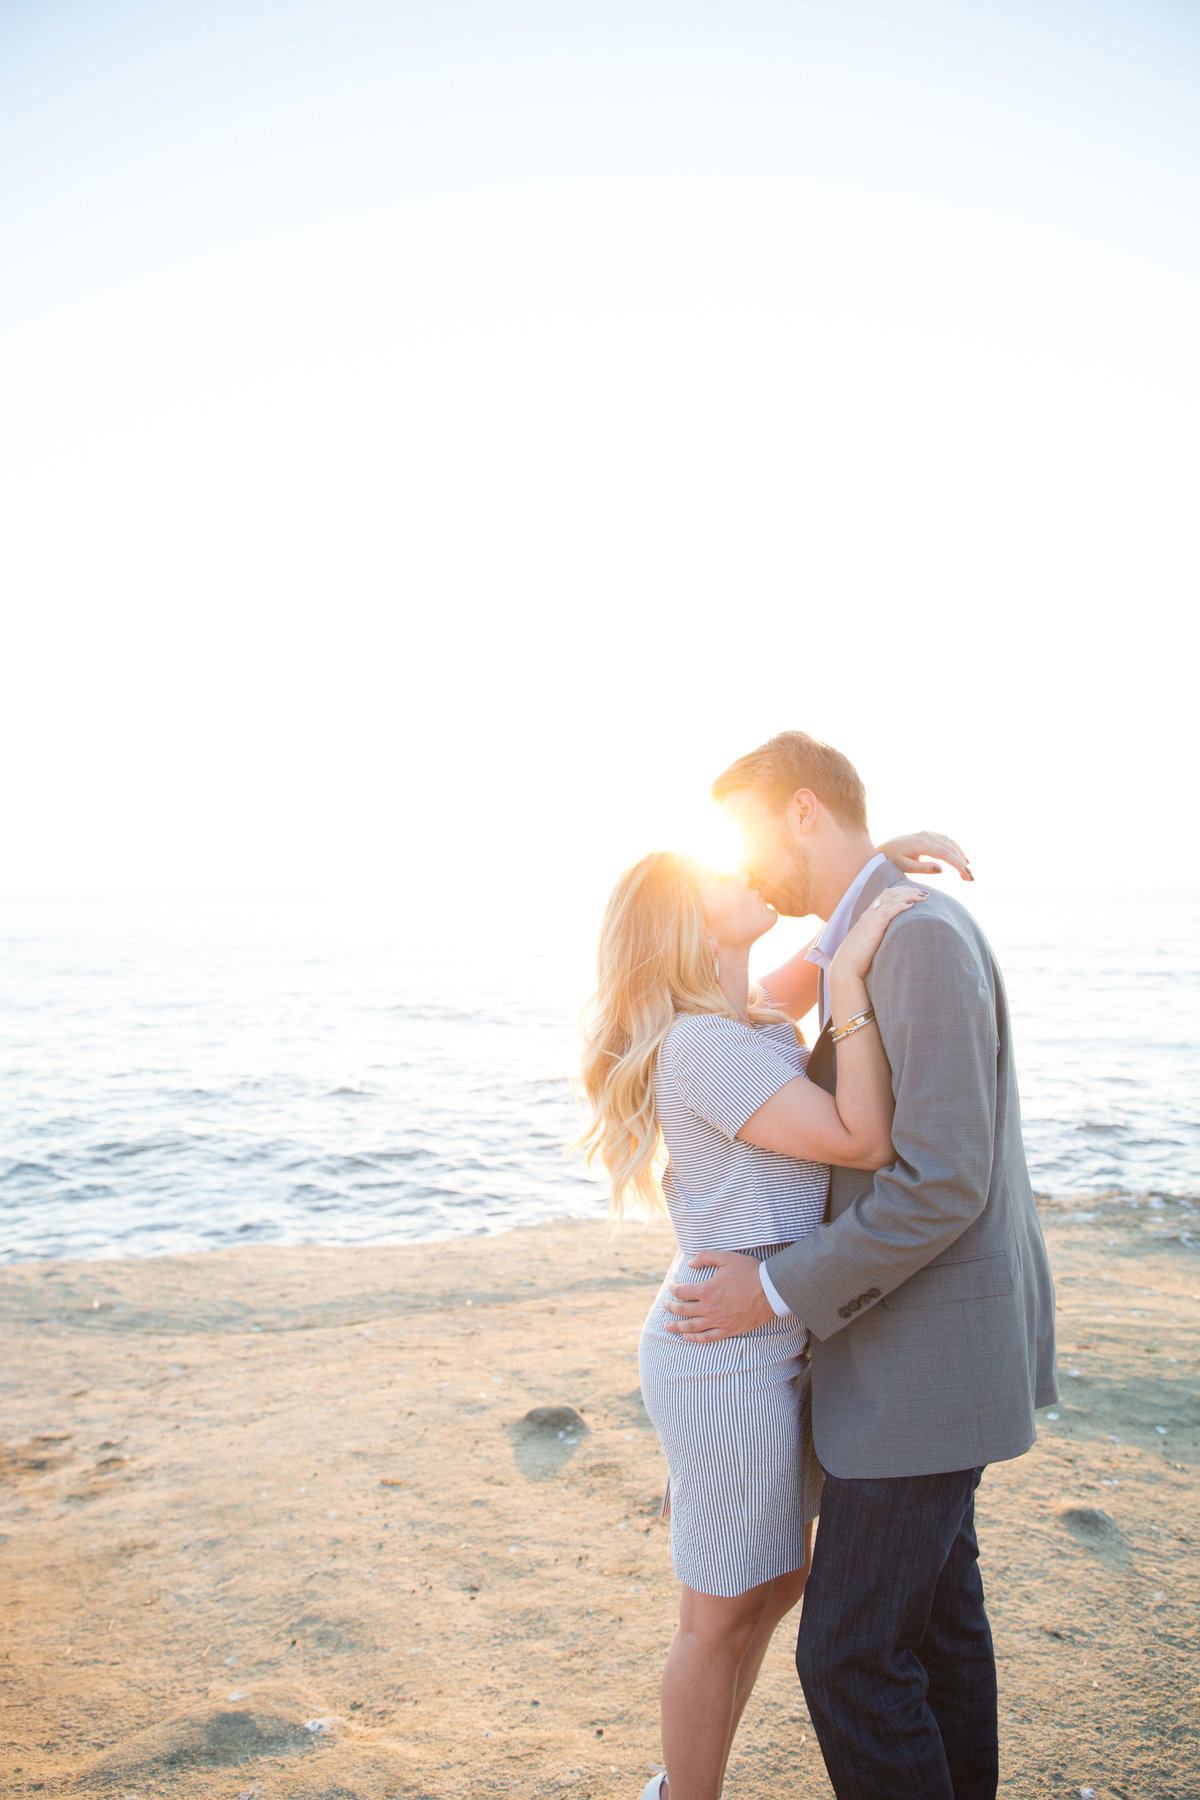 babsie-ly-photography-surprise-proposal-photographer-san-diego-california-sunset-cliffs-epic-scenery-012